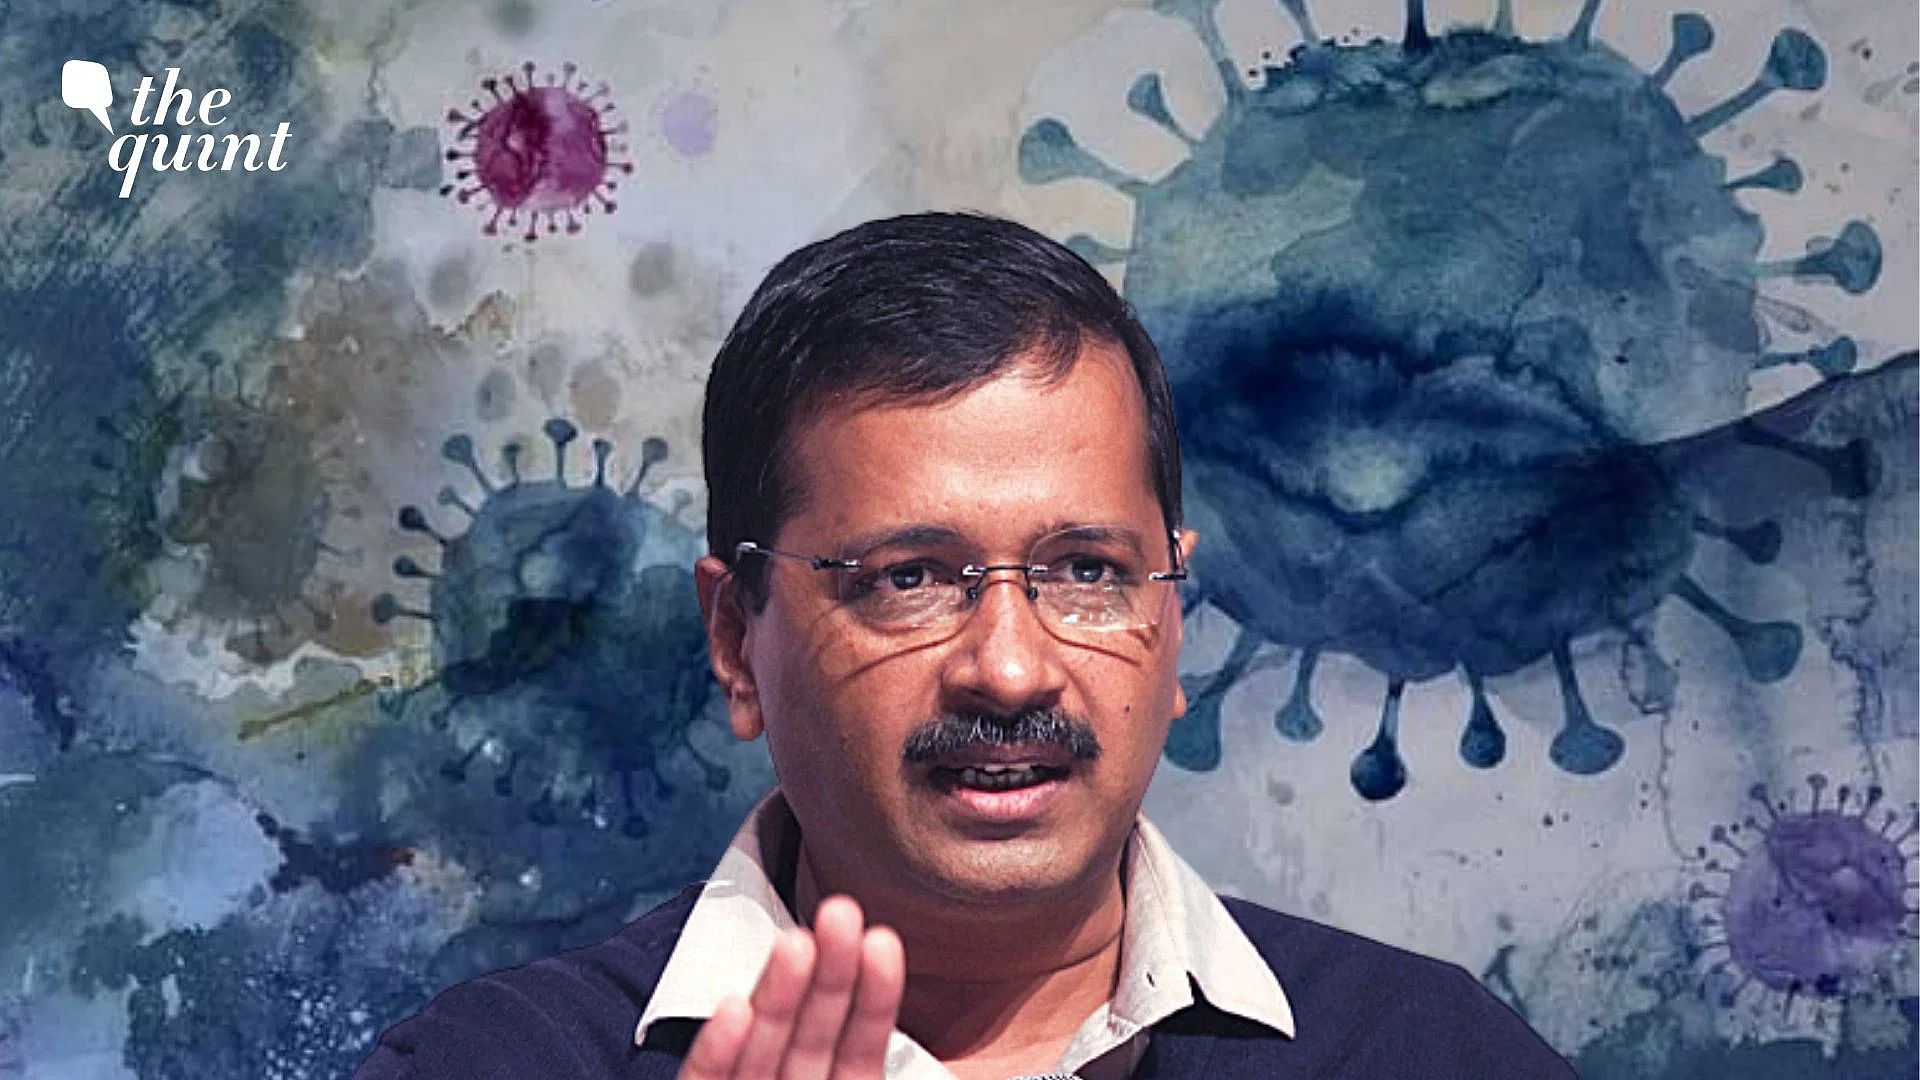 <div class="paragraphs"><p>Meanwhile, Delhi Chief Minister Arvind Kejriwal said that hospital occupancy was extremely low, and that there was no need for the public to panic amid an uptick in COVID-19 cases.&nbsp;</p></div>